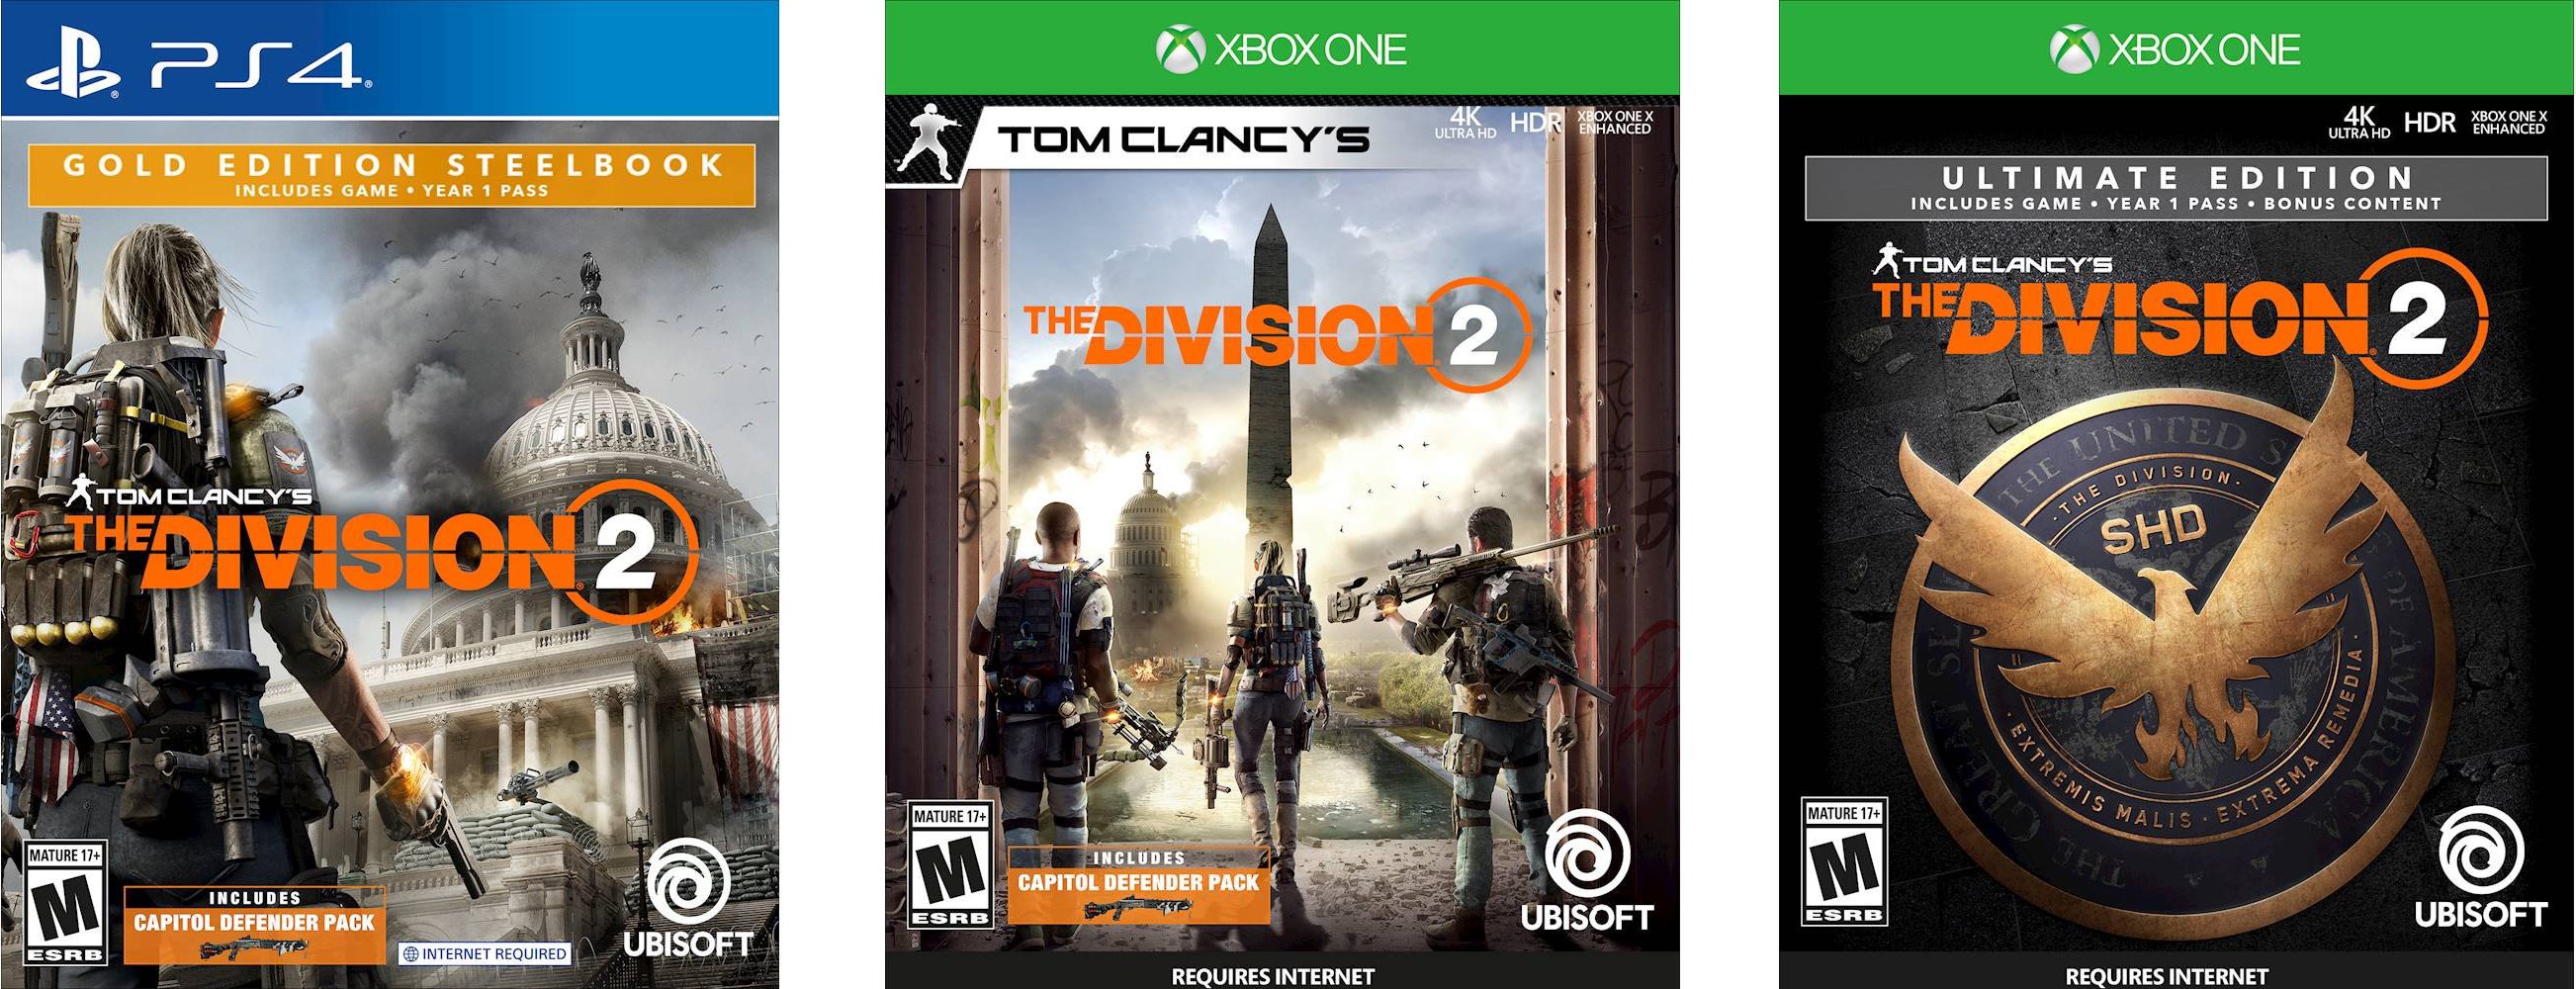 Division 2 ps4. Tom Clancy's the Division Gold Edition Xbox. The Division Gold Edition ps4. Tom Clancy's the Division 2 - Ultimate Edition.